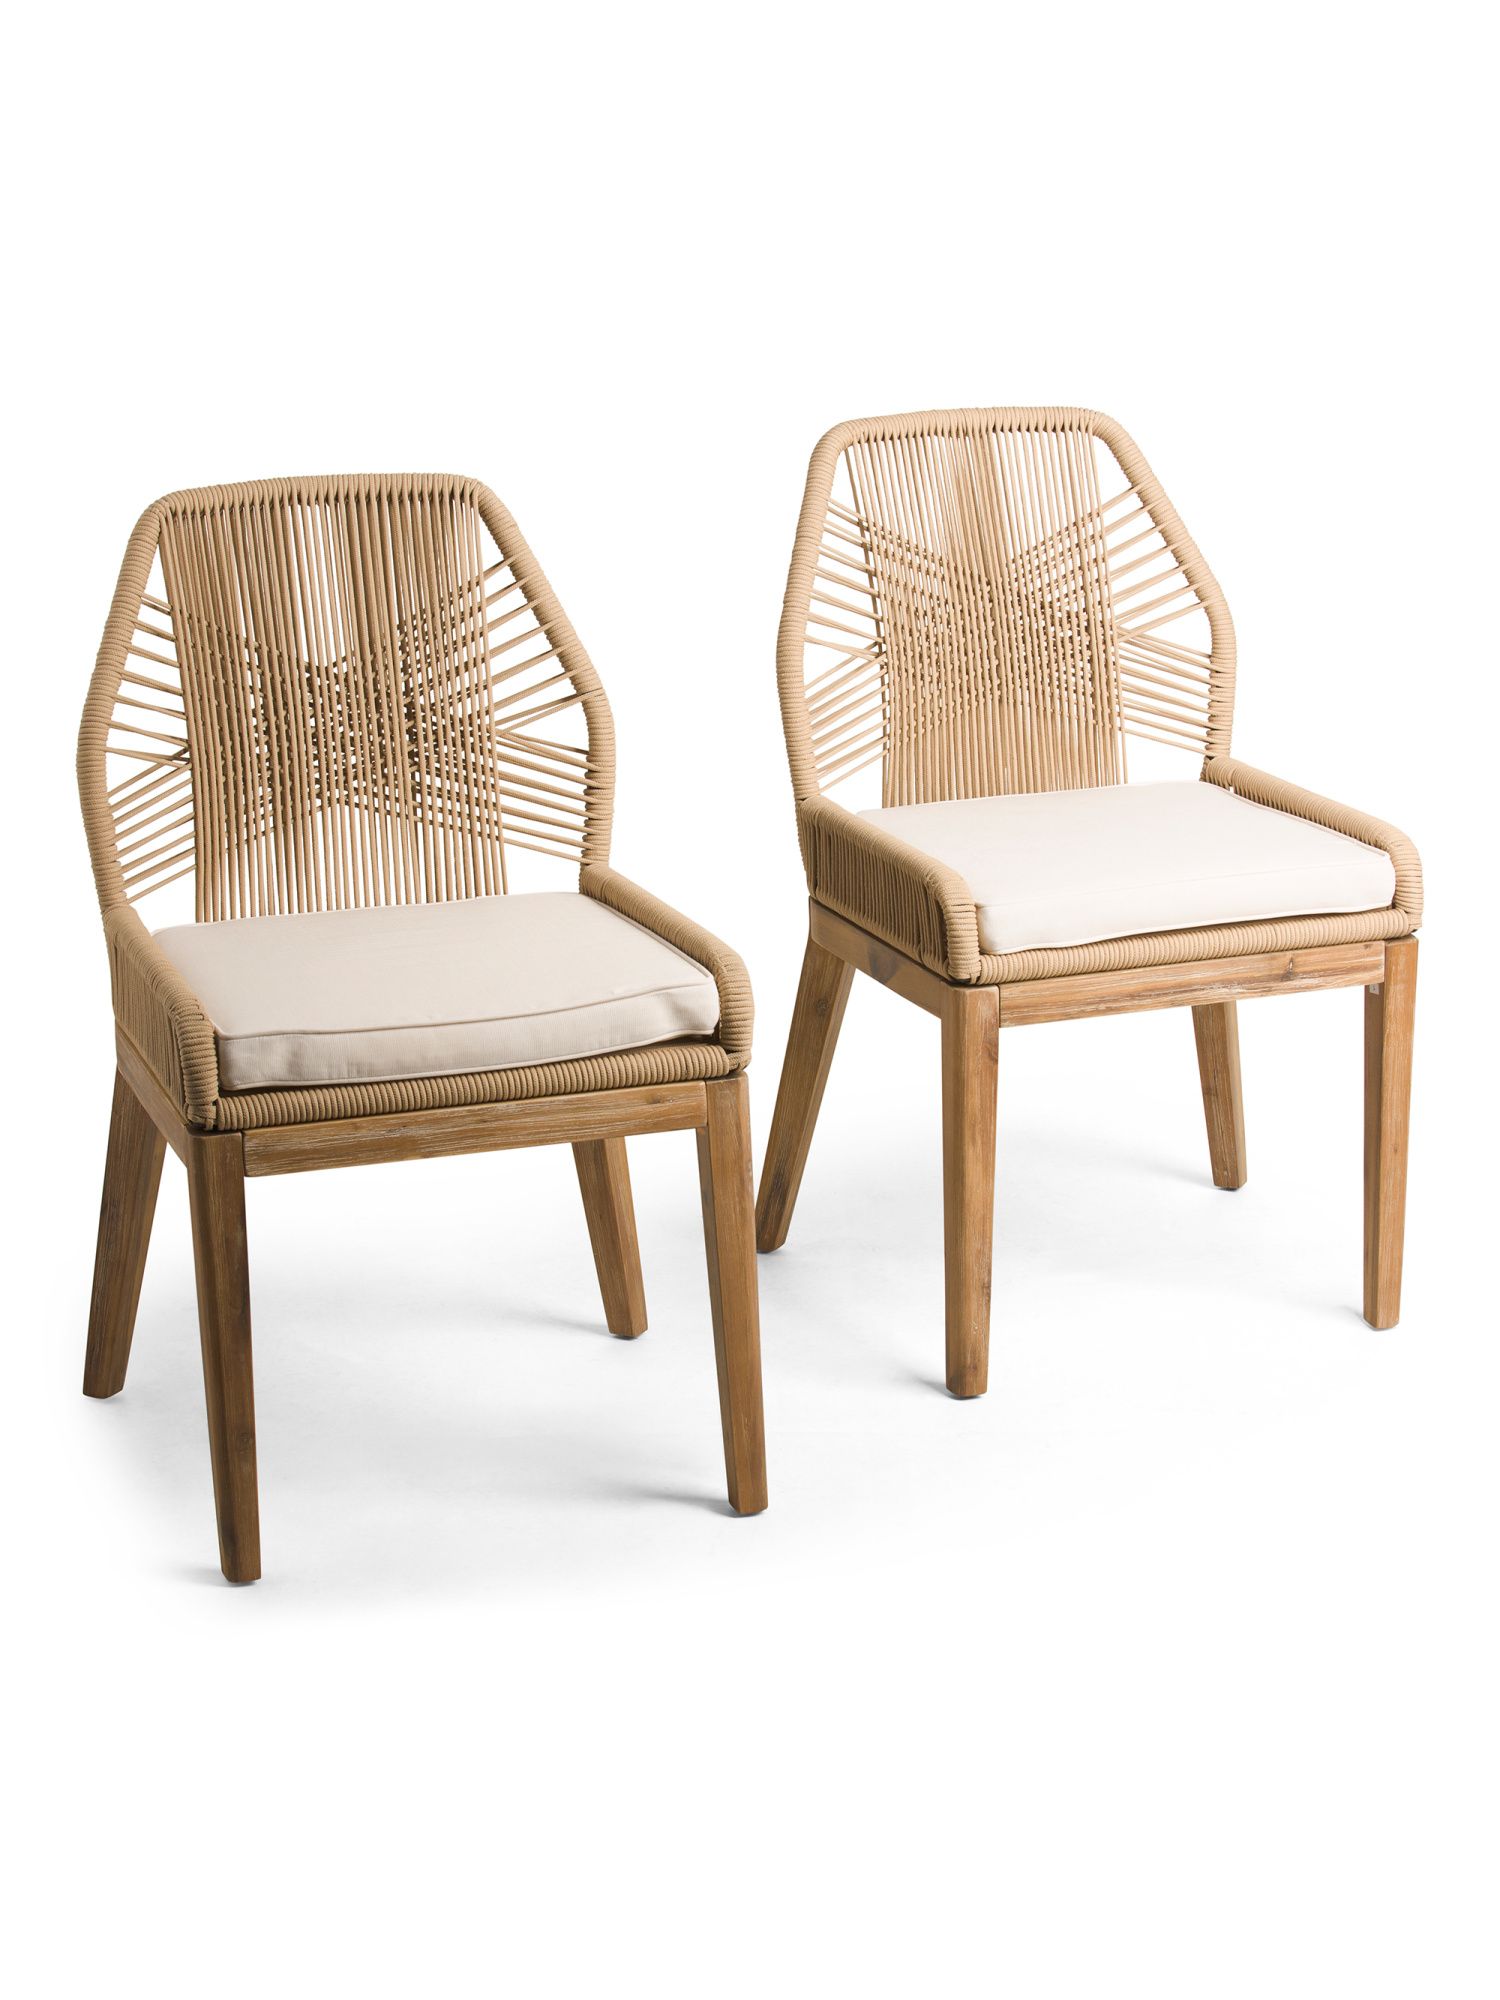 Set Of 2 Rope Crossweave Dining Chairs | TJ Maxx